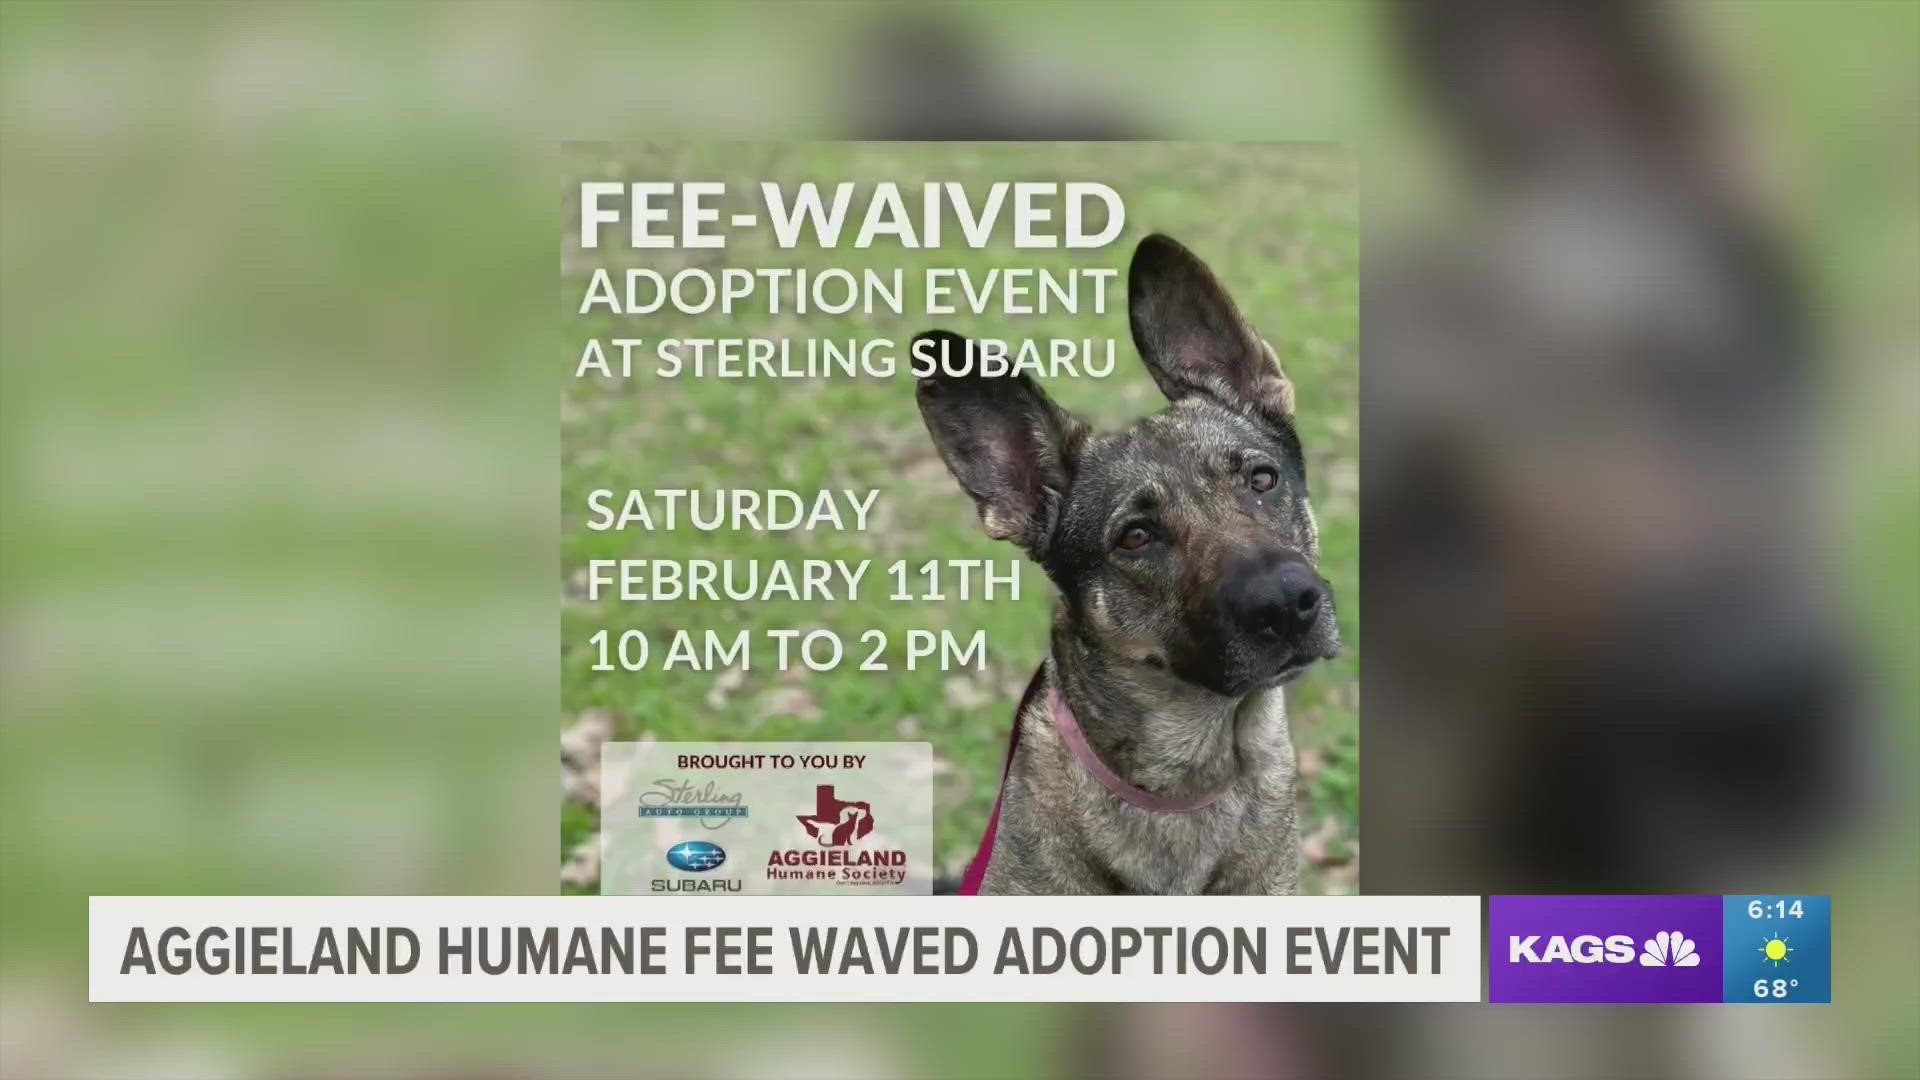 Adopt a new furry friend at a discount this coming Saturday!